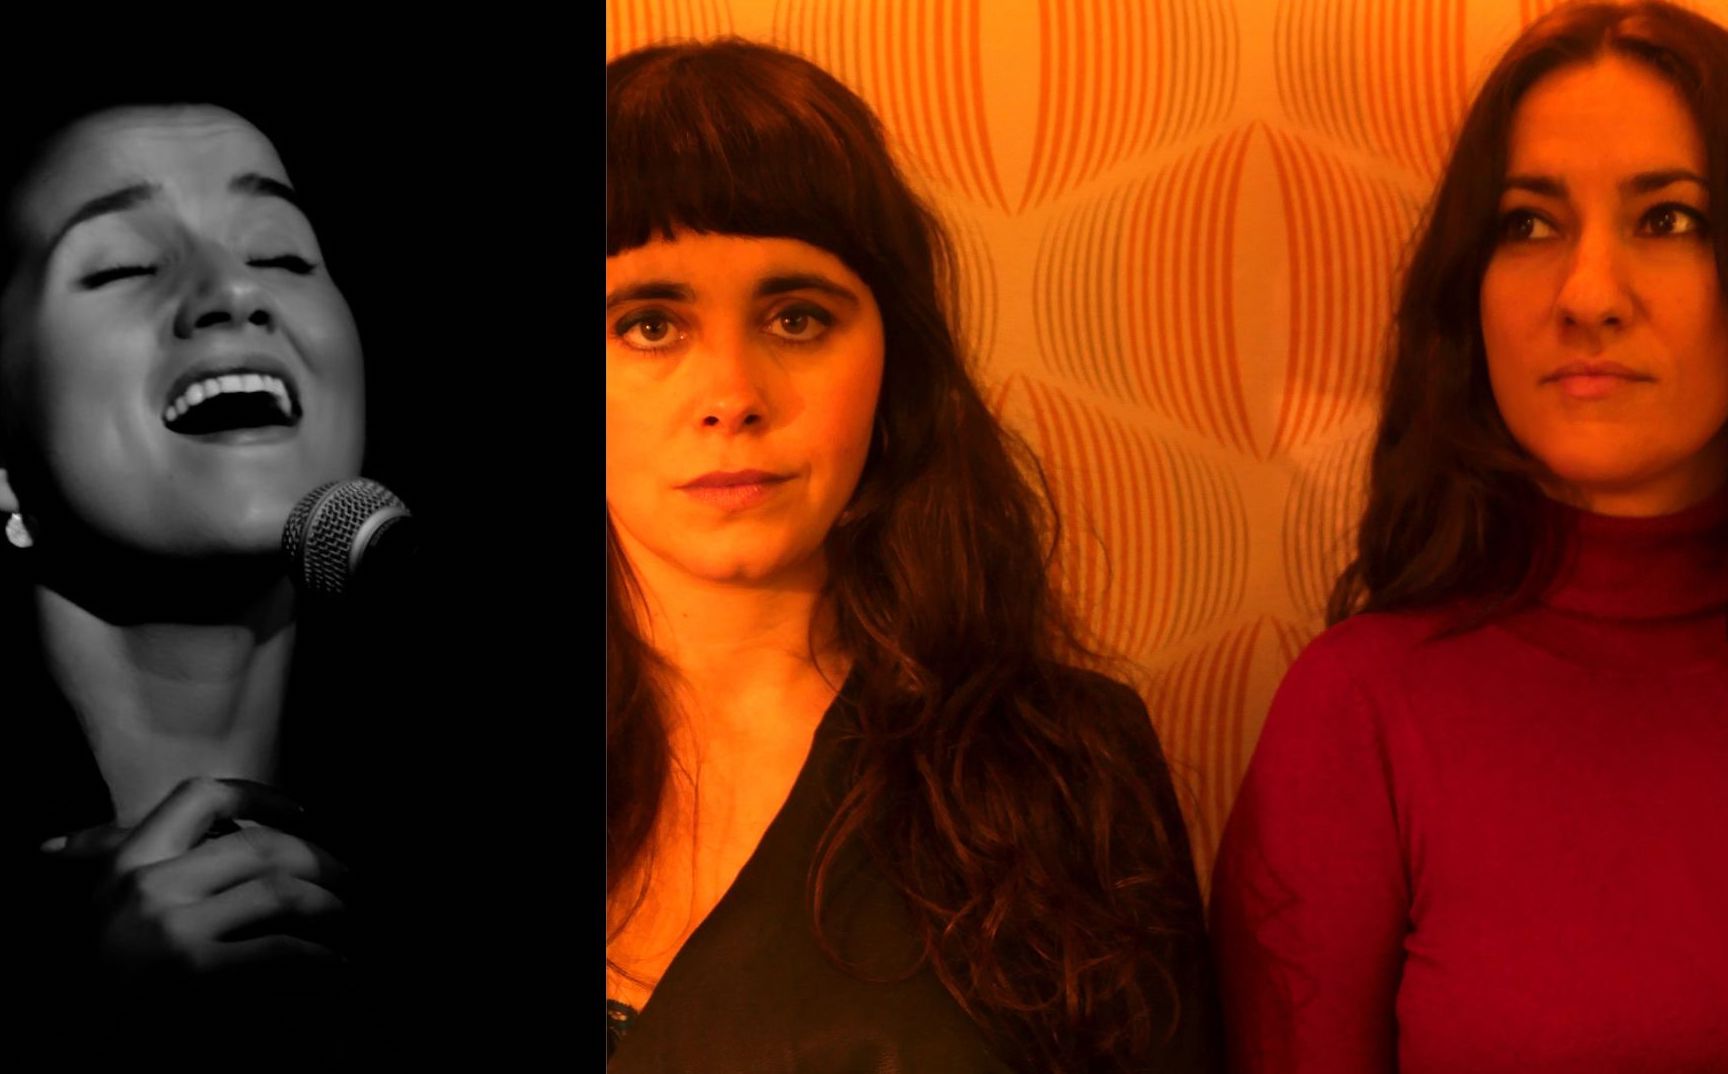 On the left a black and white photo of person singing with eyes closed, on the right, orange tinted photo of 2 women looking serious.